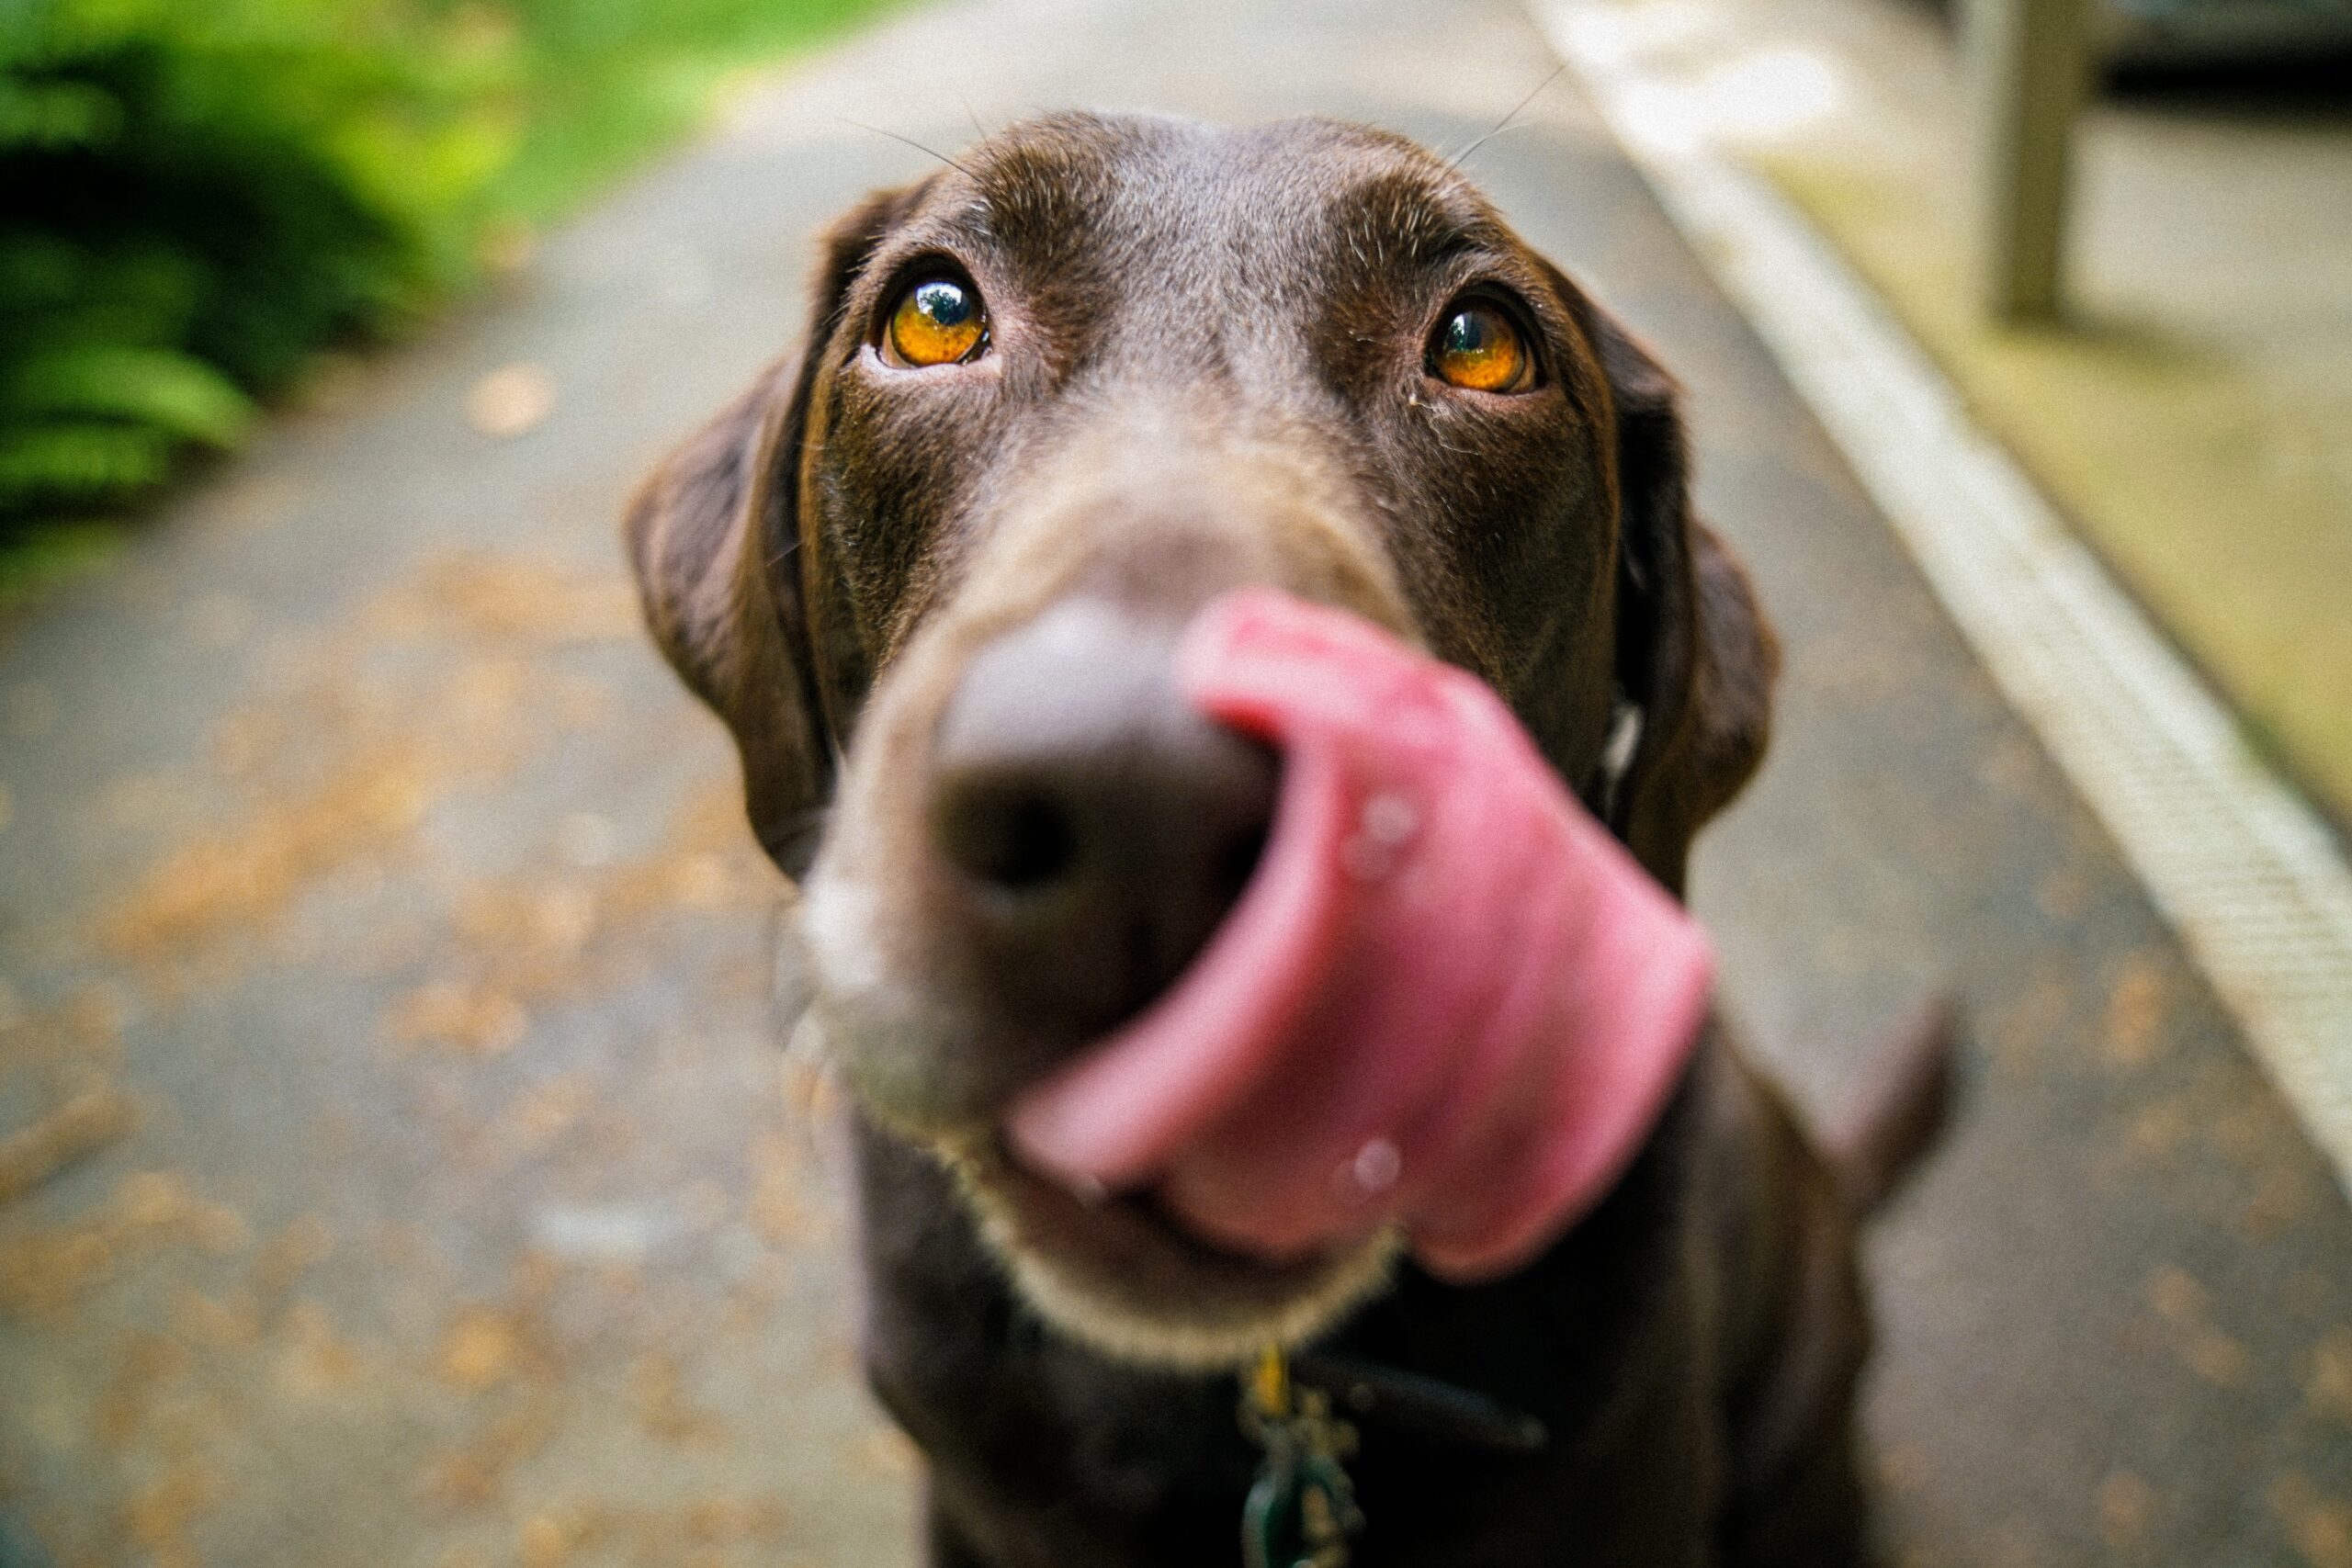 A hungry chocolate Labrador licking its lips